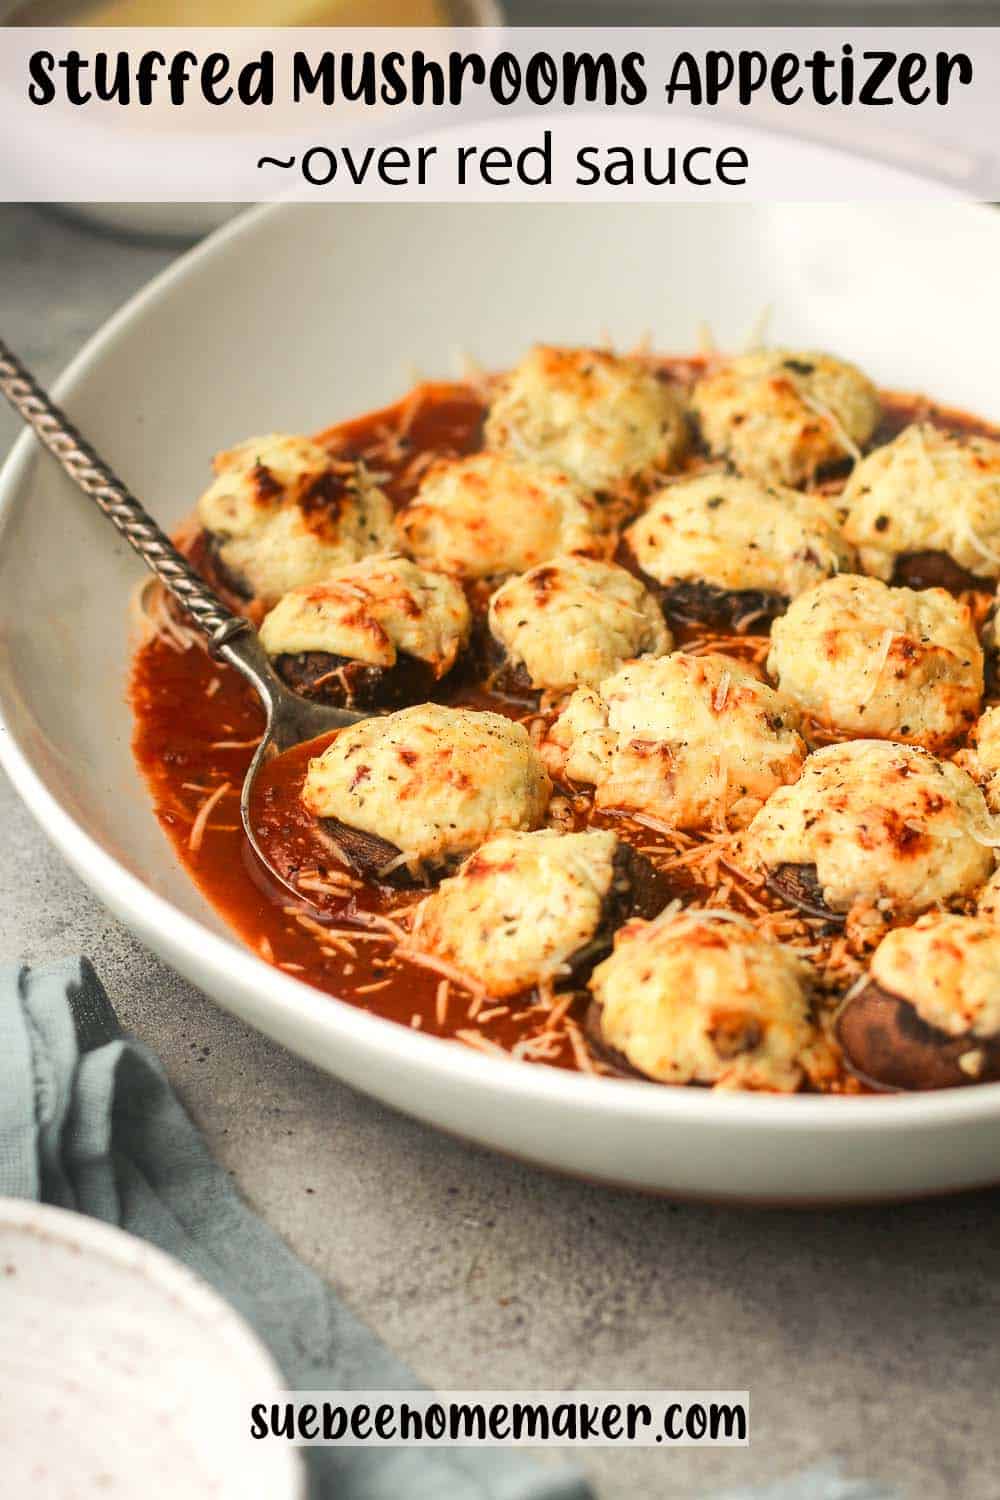 A side view of a platter of stuffed mushrooms over red sauce.